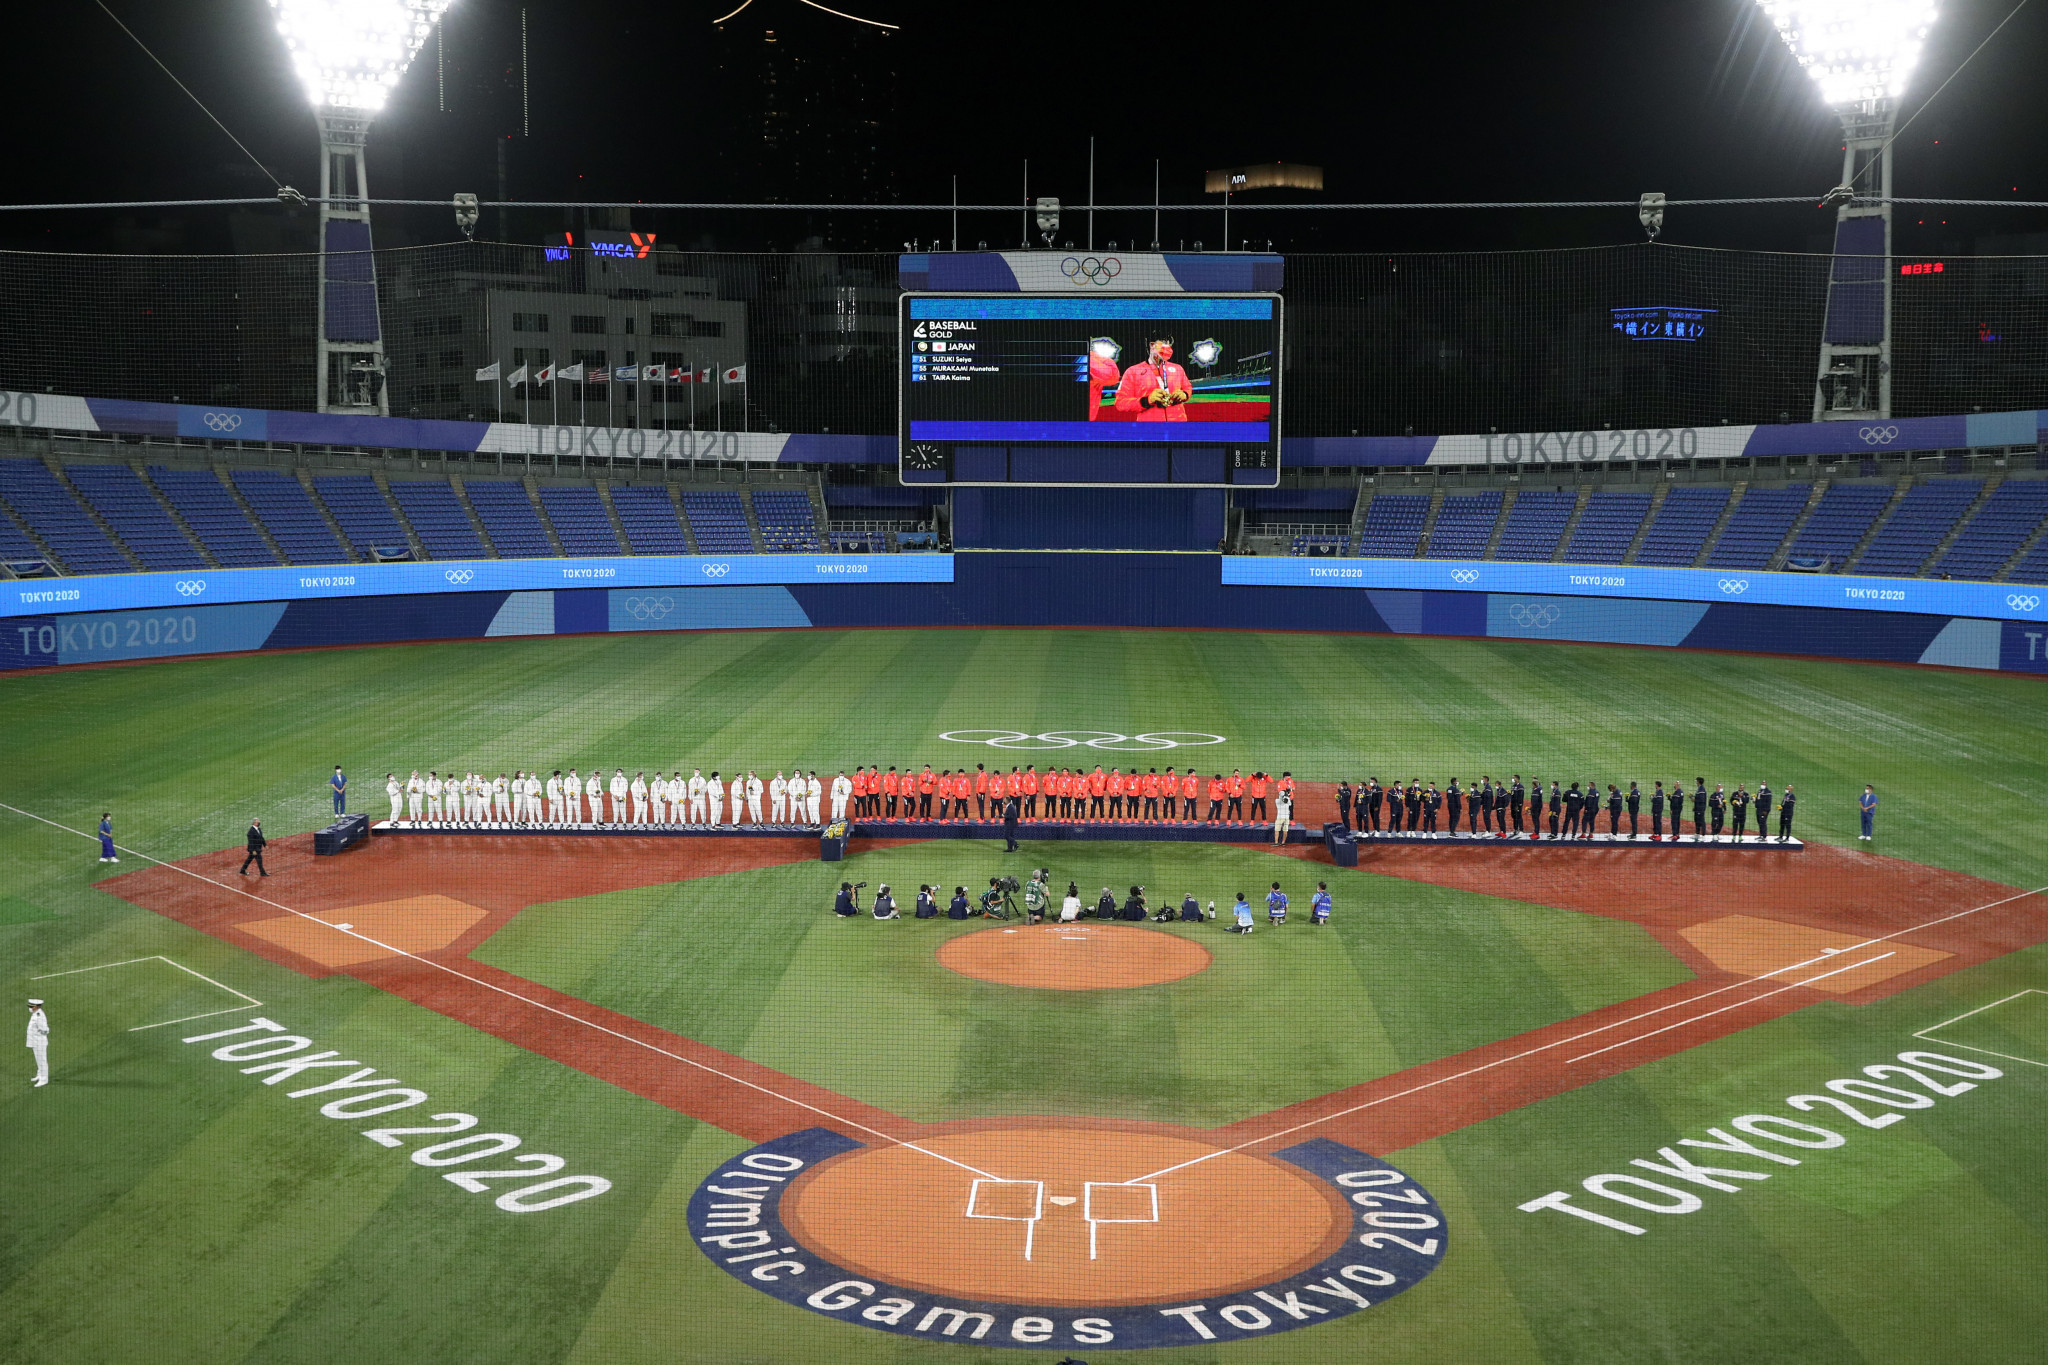 Men's baseball and women's softball featured as additional sports at Tokyo 2020 ©Getty Images